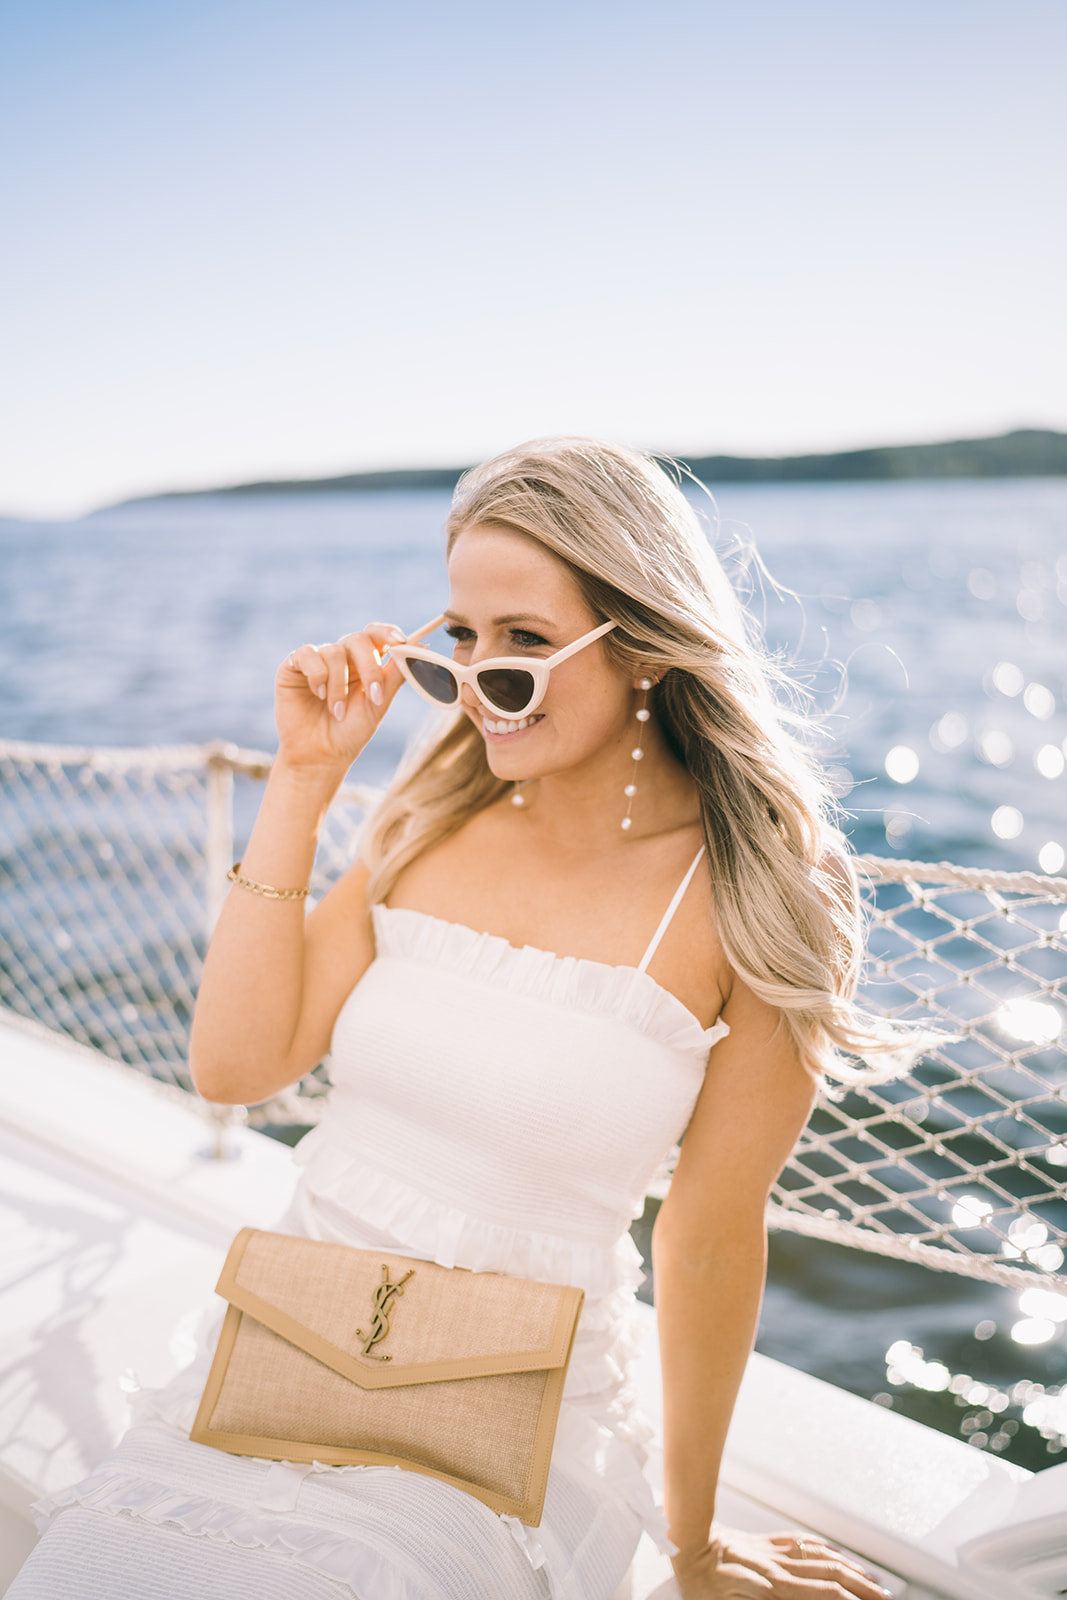 Girl sitting on side of a boat lowering her white heart shaped sunglasses smiling